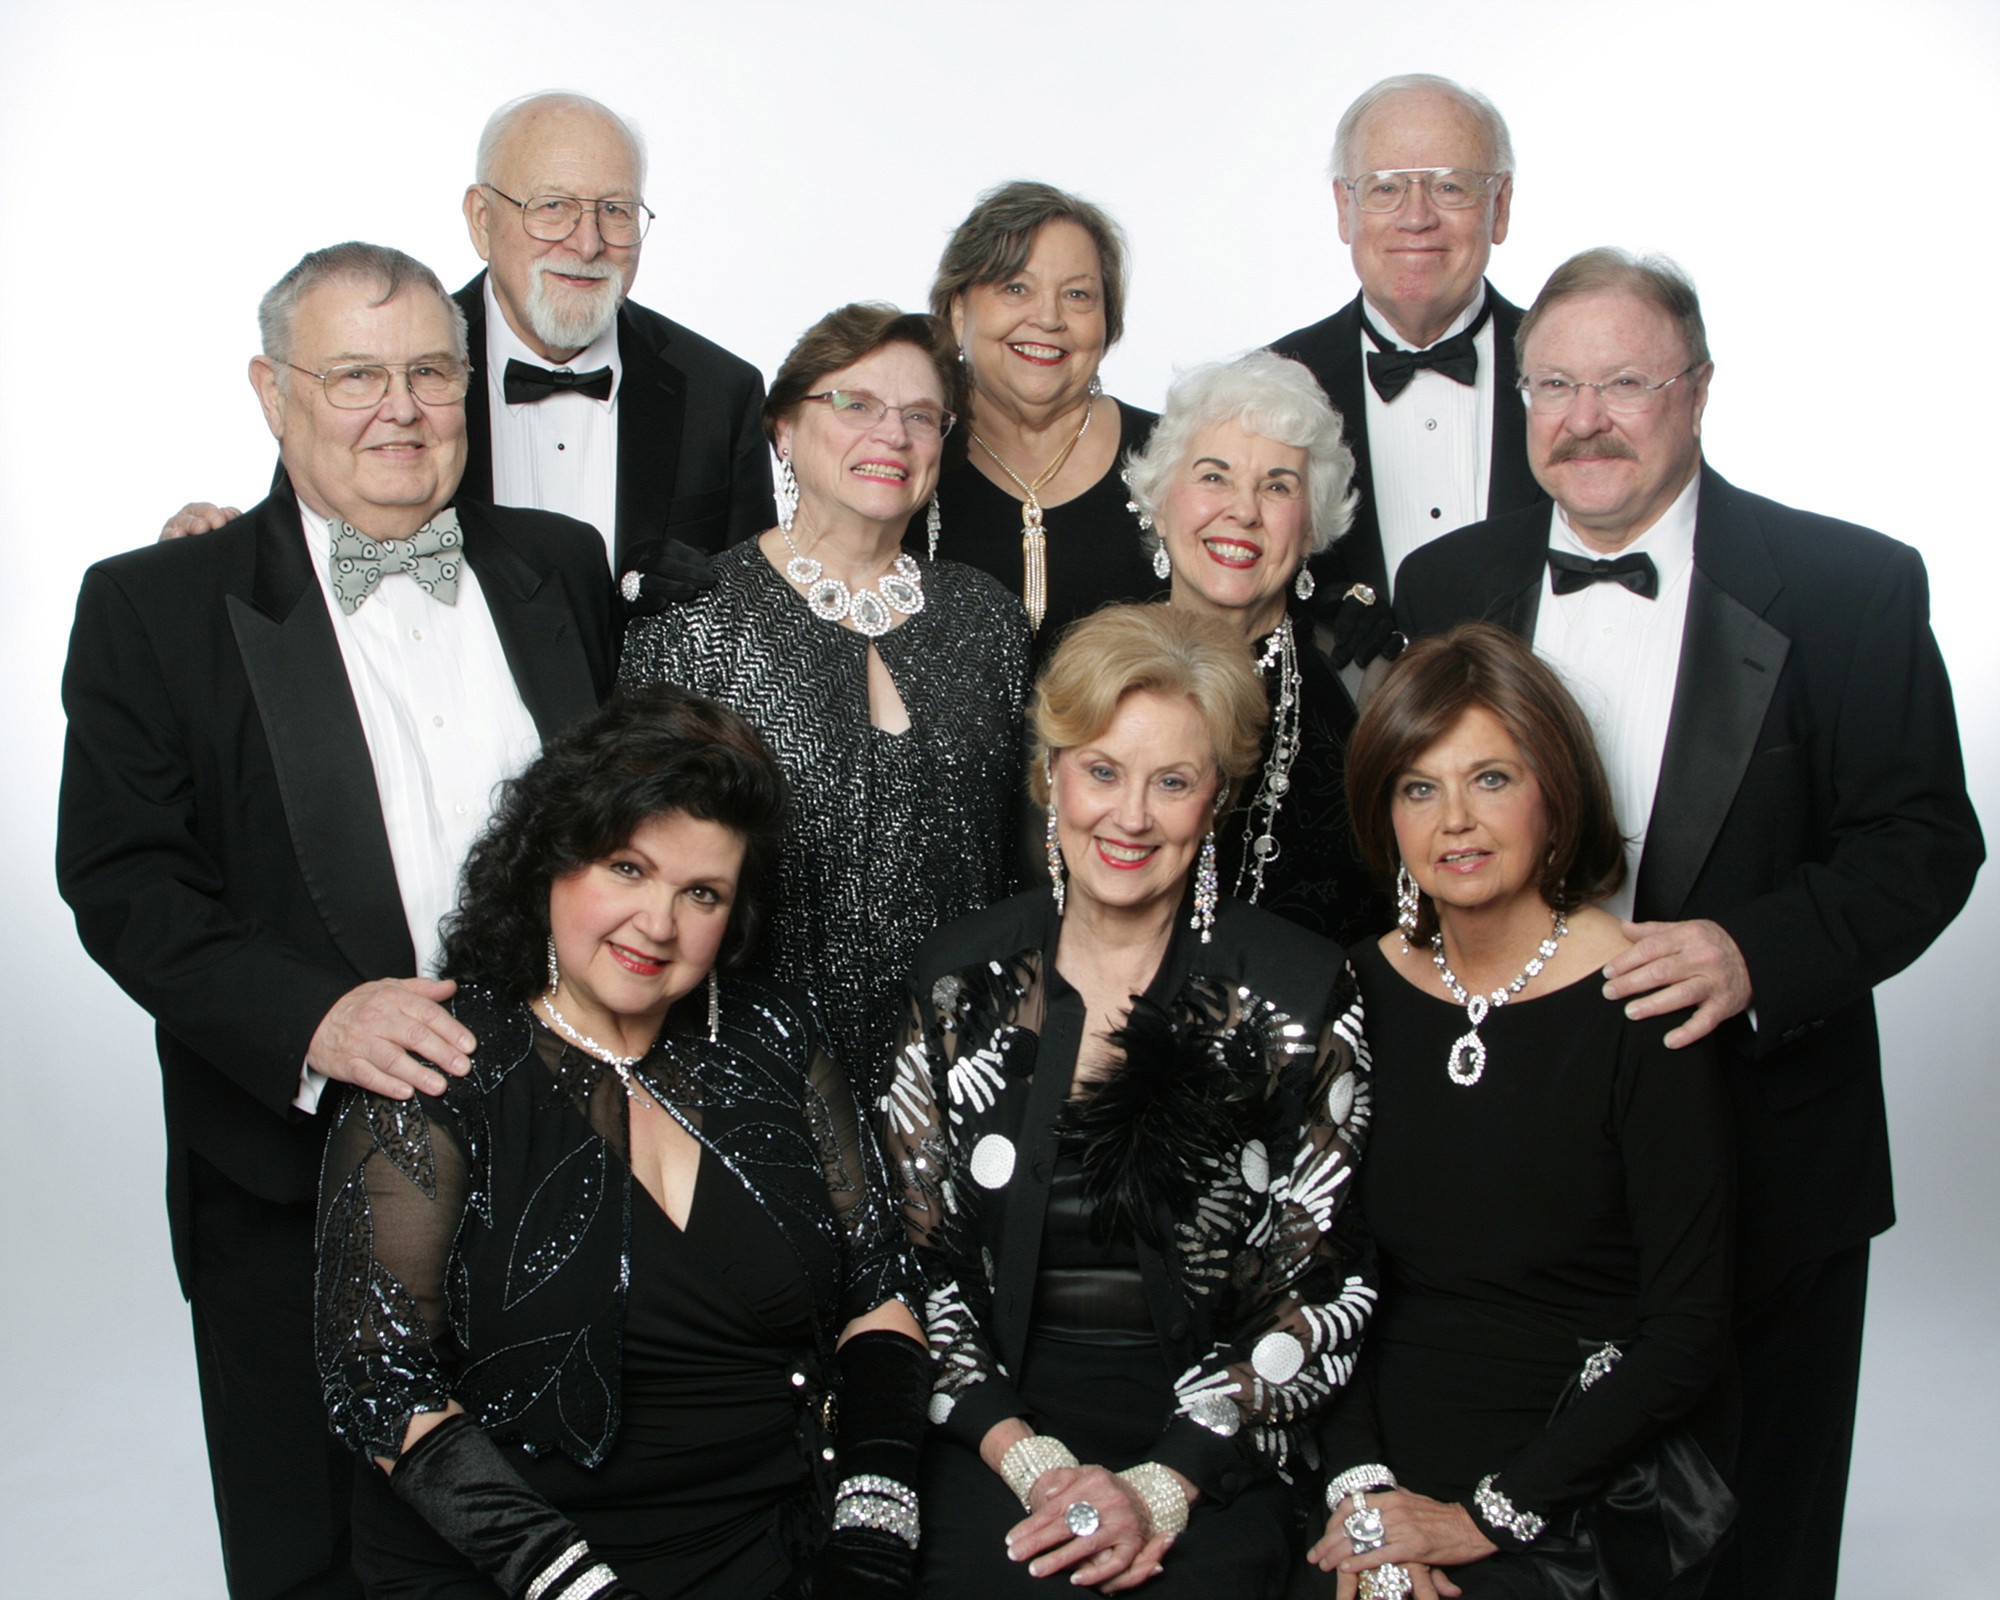 &quot;Follies Va Va Voom: A Tribute to Women&quot; features Vancouver's senior musical theater troupe performing show tunes, May 28-30 at the Barberton Grange.